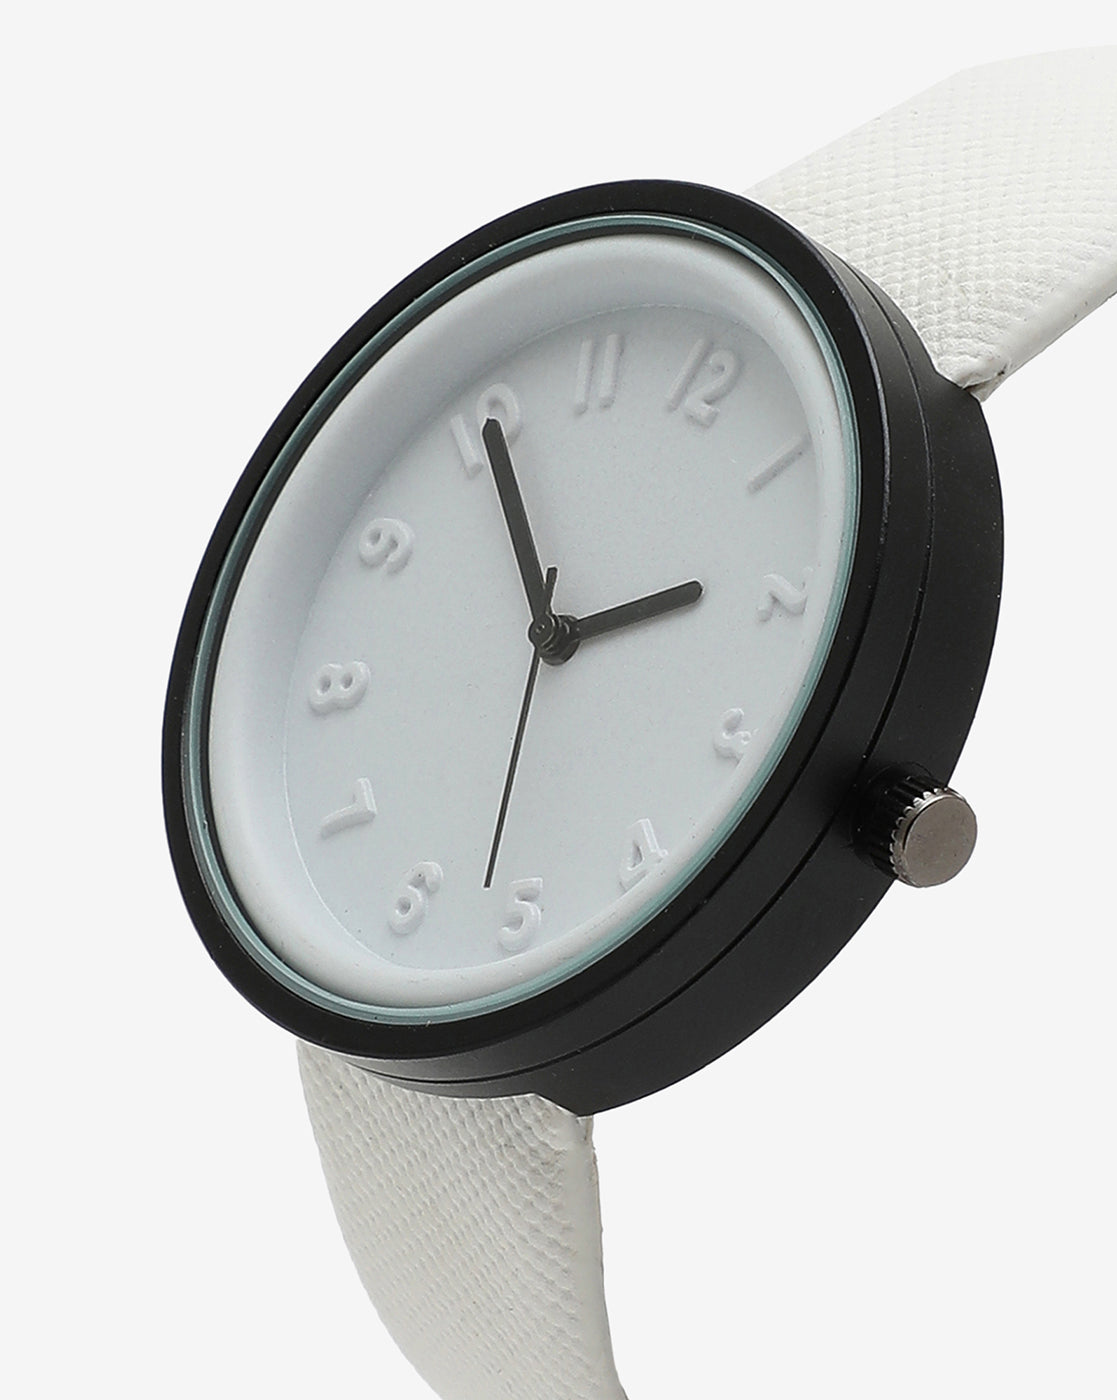 White & Black Analog Round Dial With Black Hour Marker & White Leather Strap